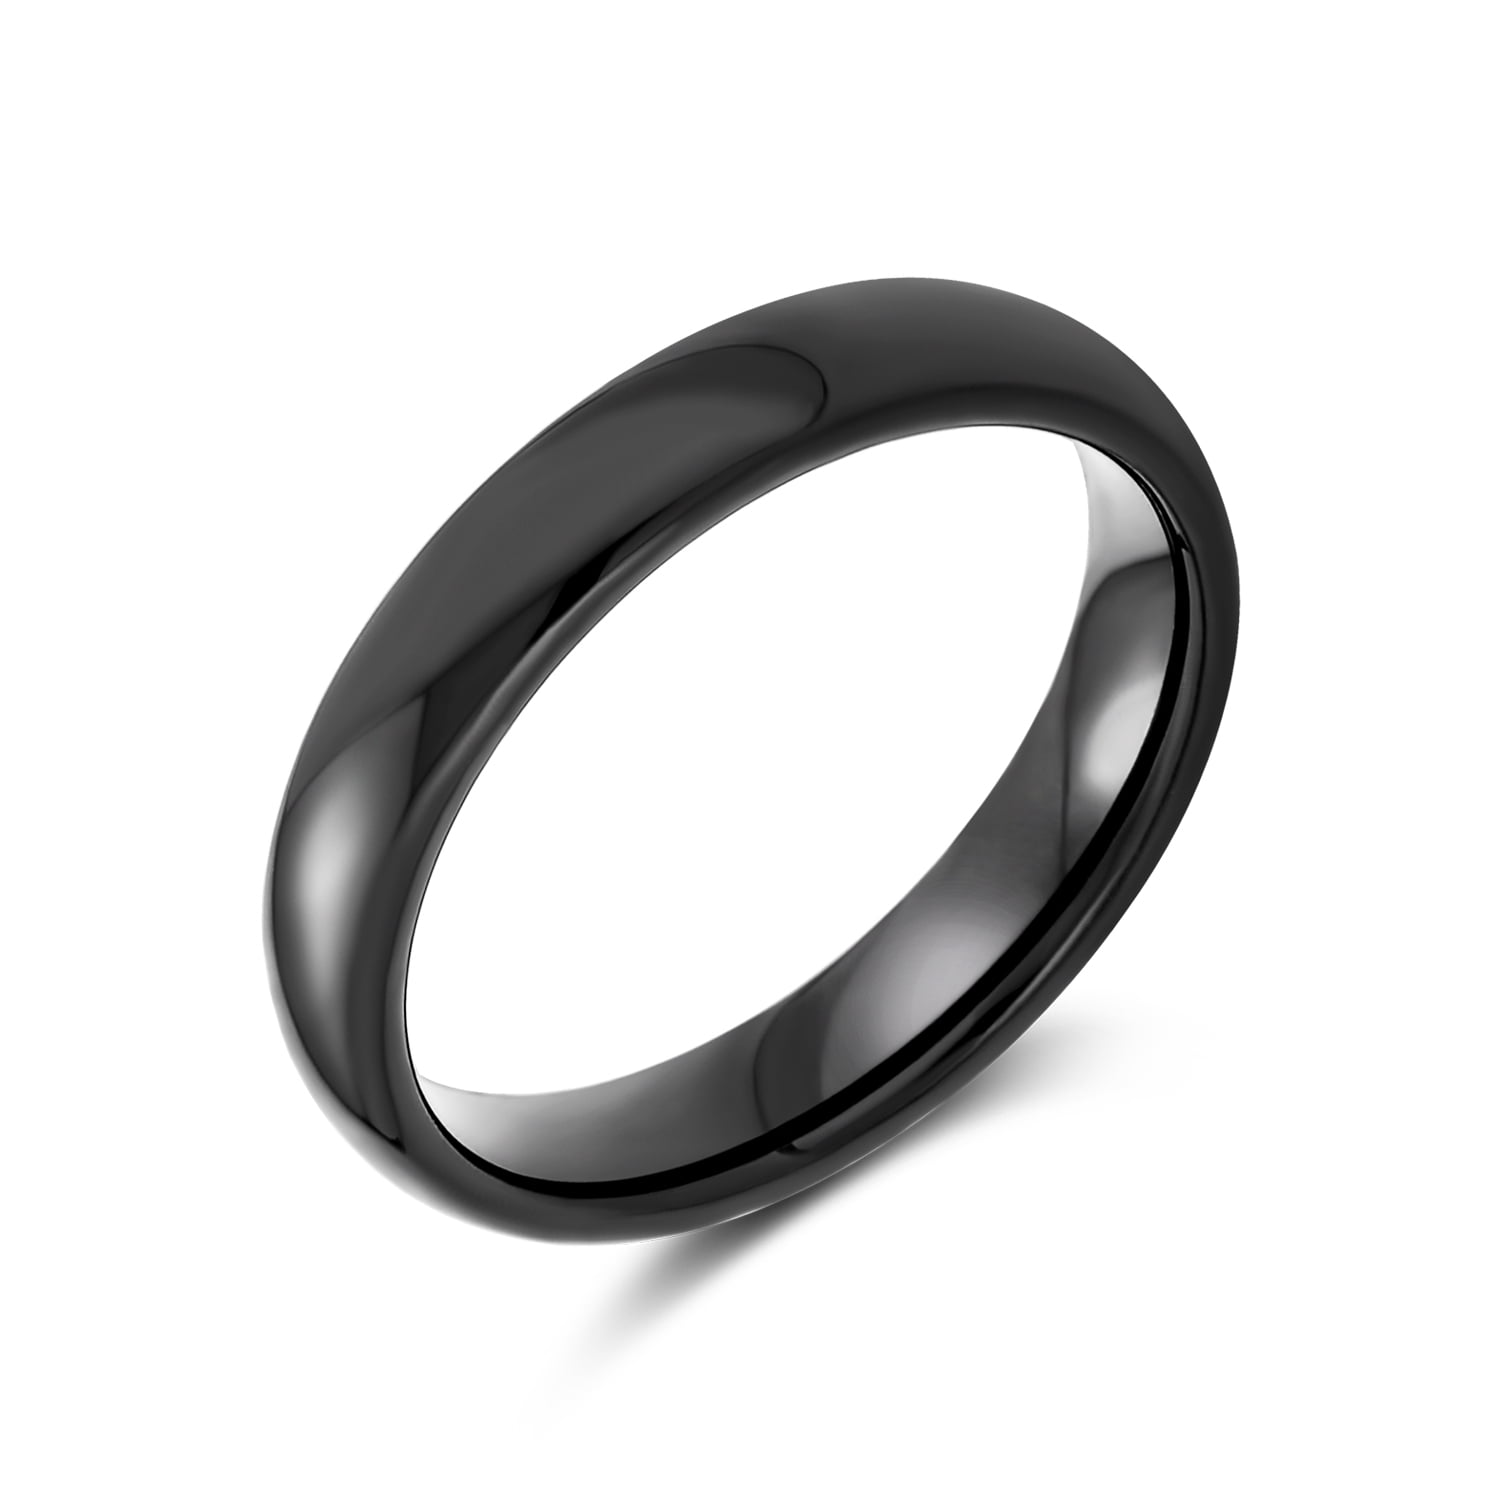 New size 5 Black Plated 4mm TITANIUM Ring Band with Highly Polished Finish